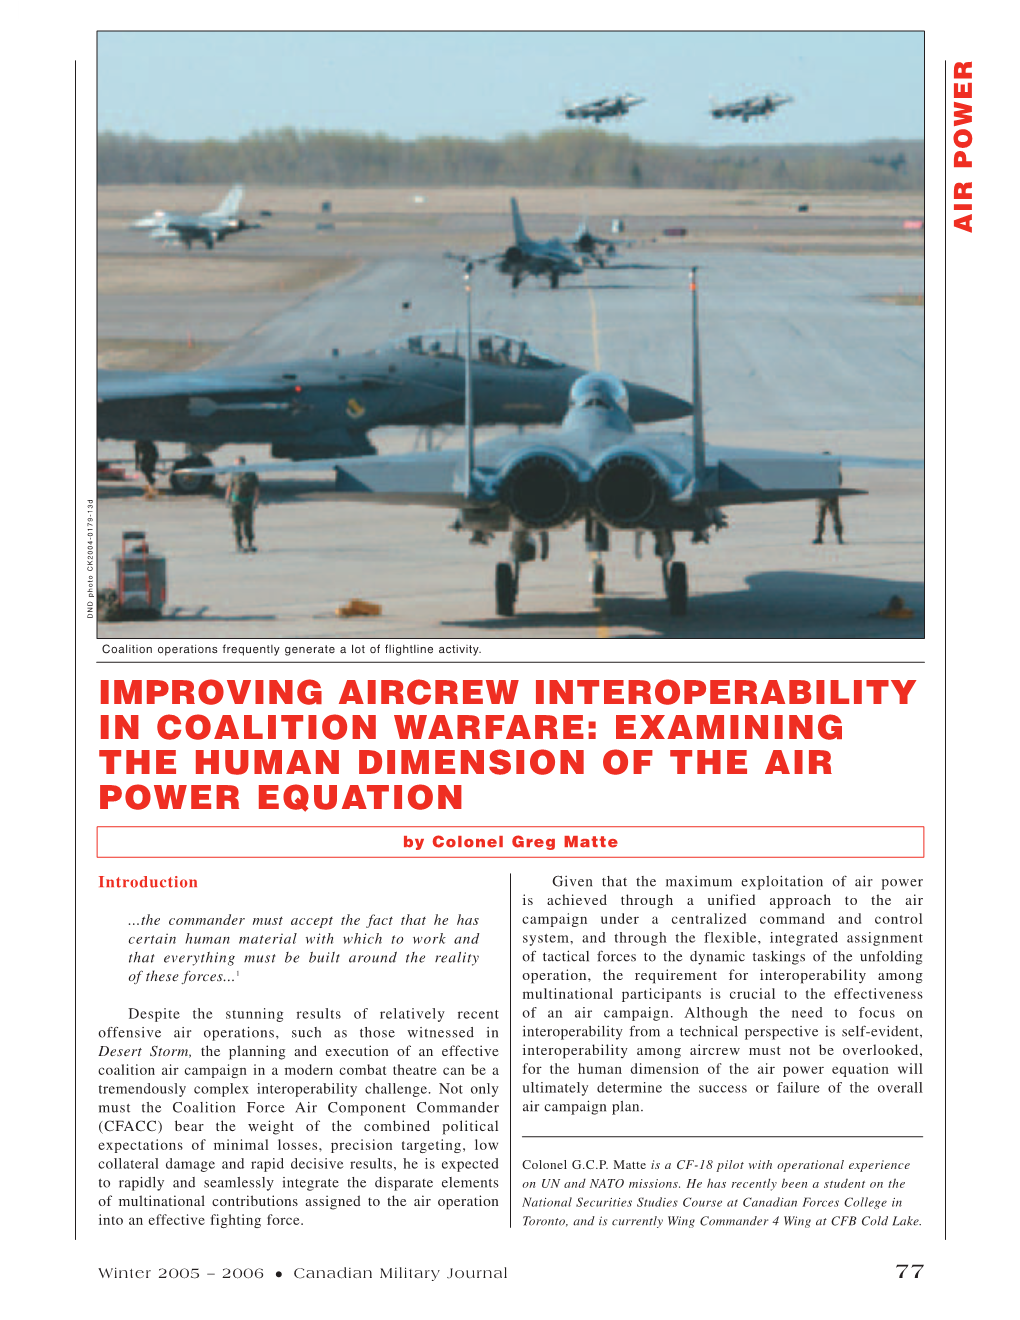 Improving Aircrew Interoperability in Coalition Warfare: Examining the Human Dimension of the Air Power Equation